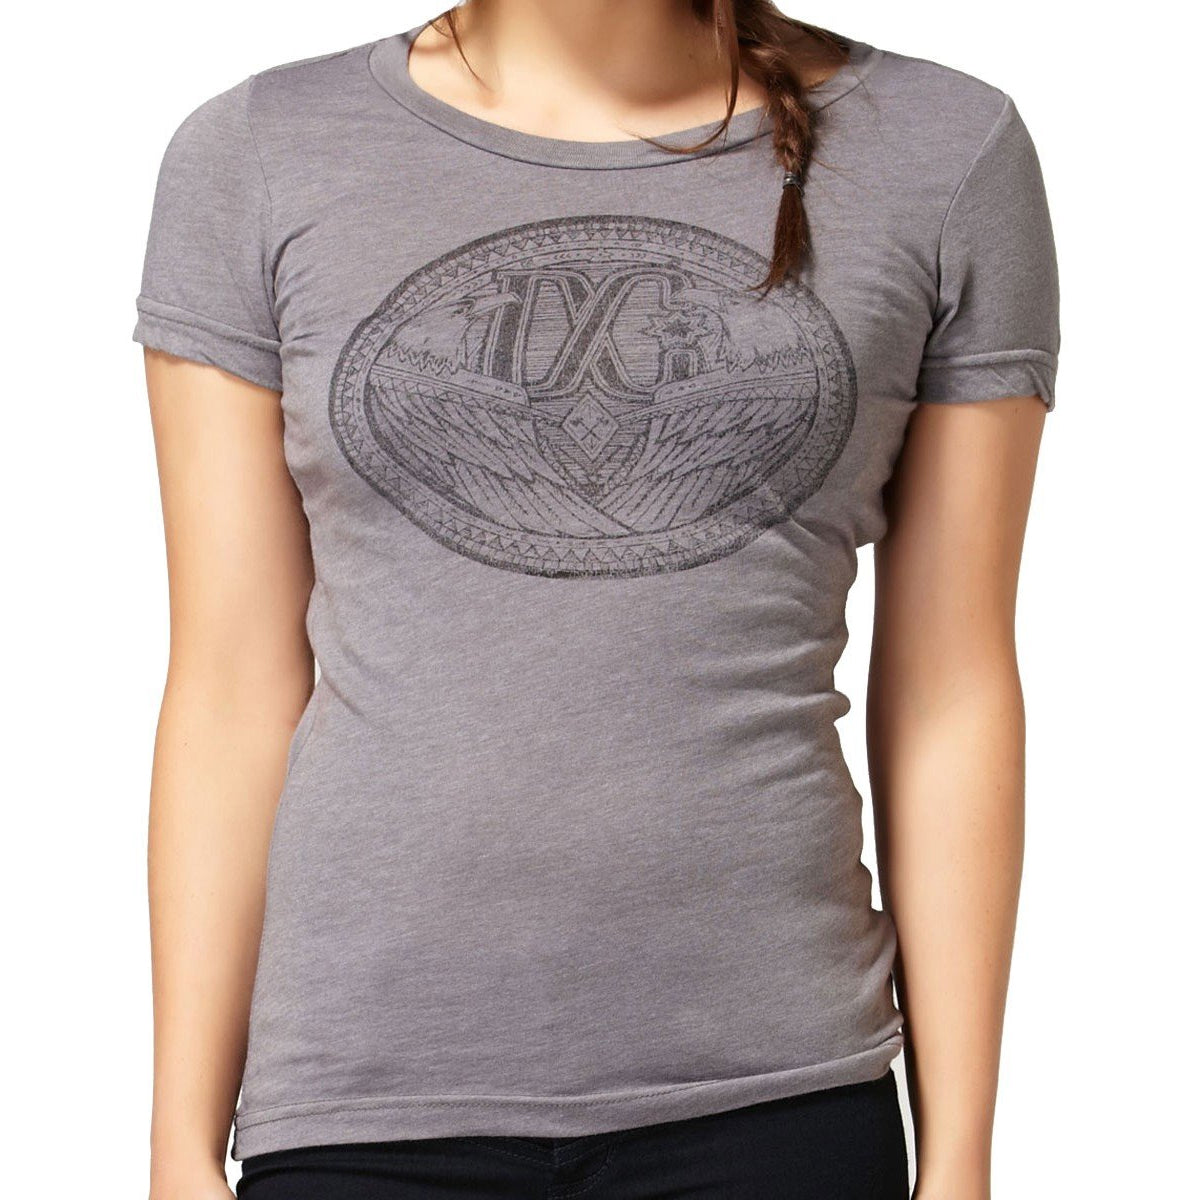 DC Montaine Women's Short-Sleeve Shirts - Hub Special Gray